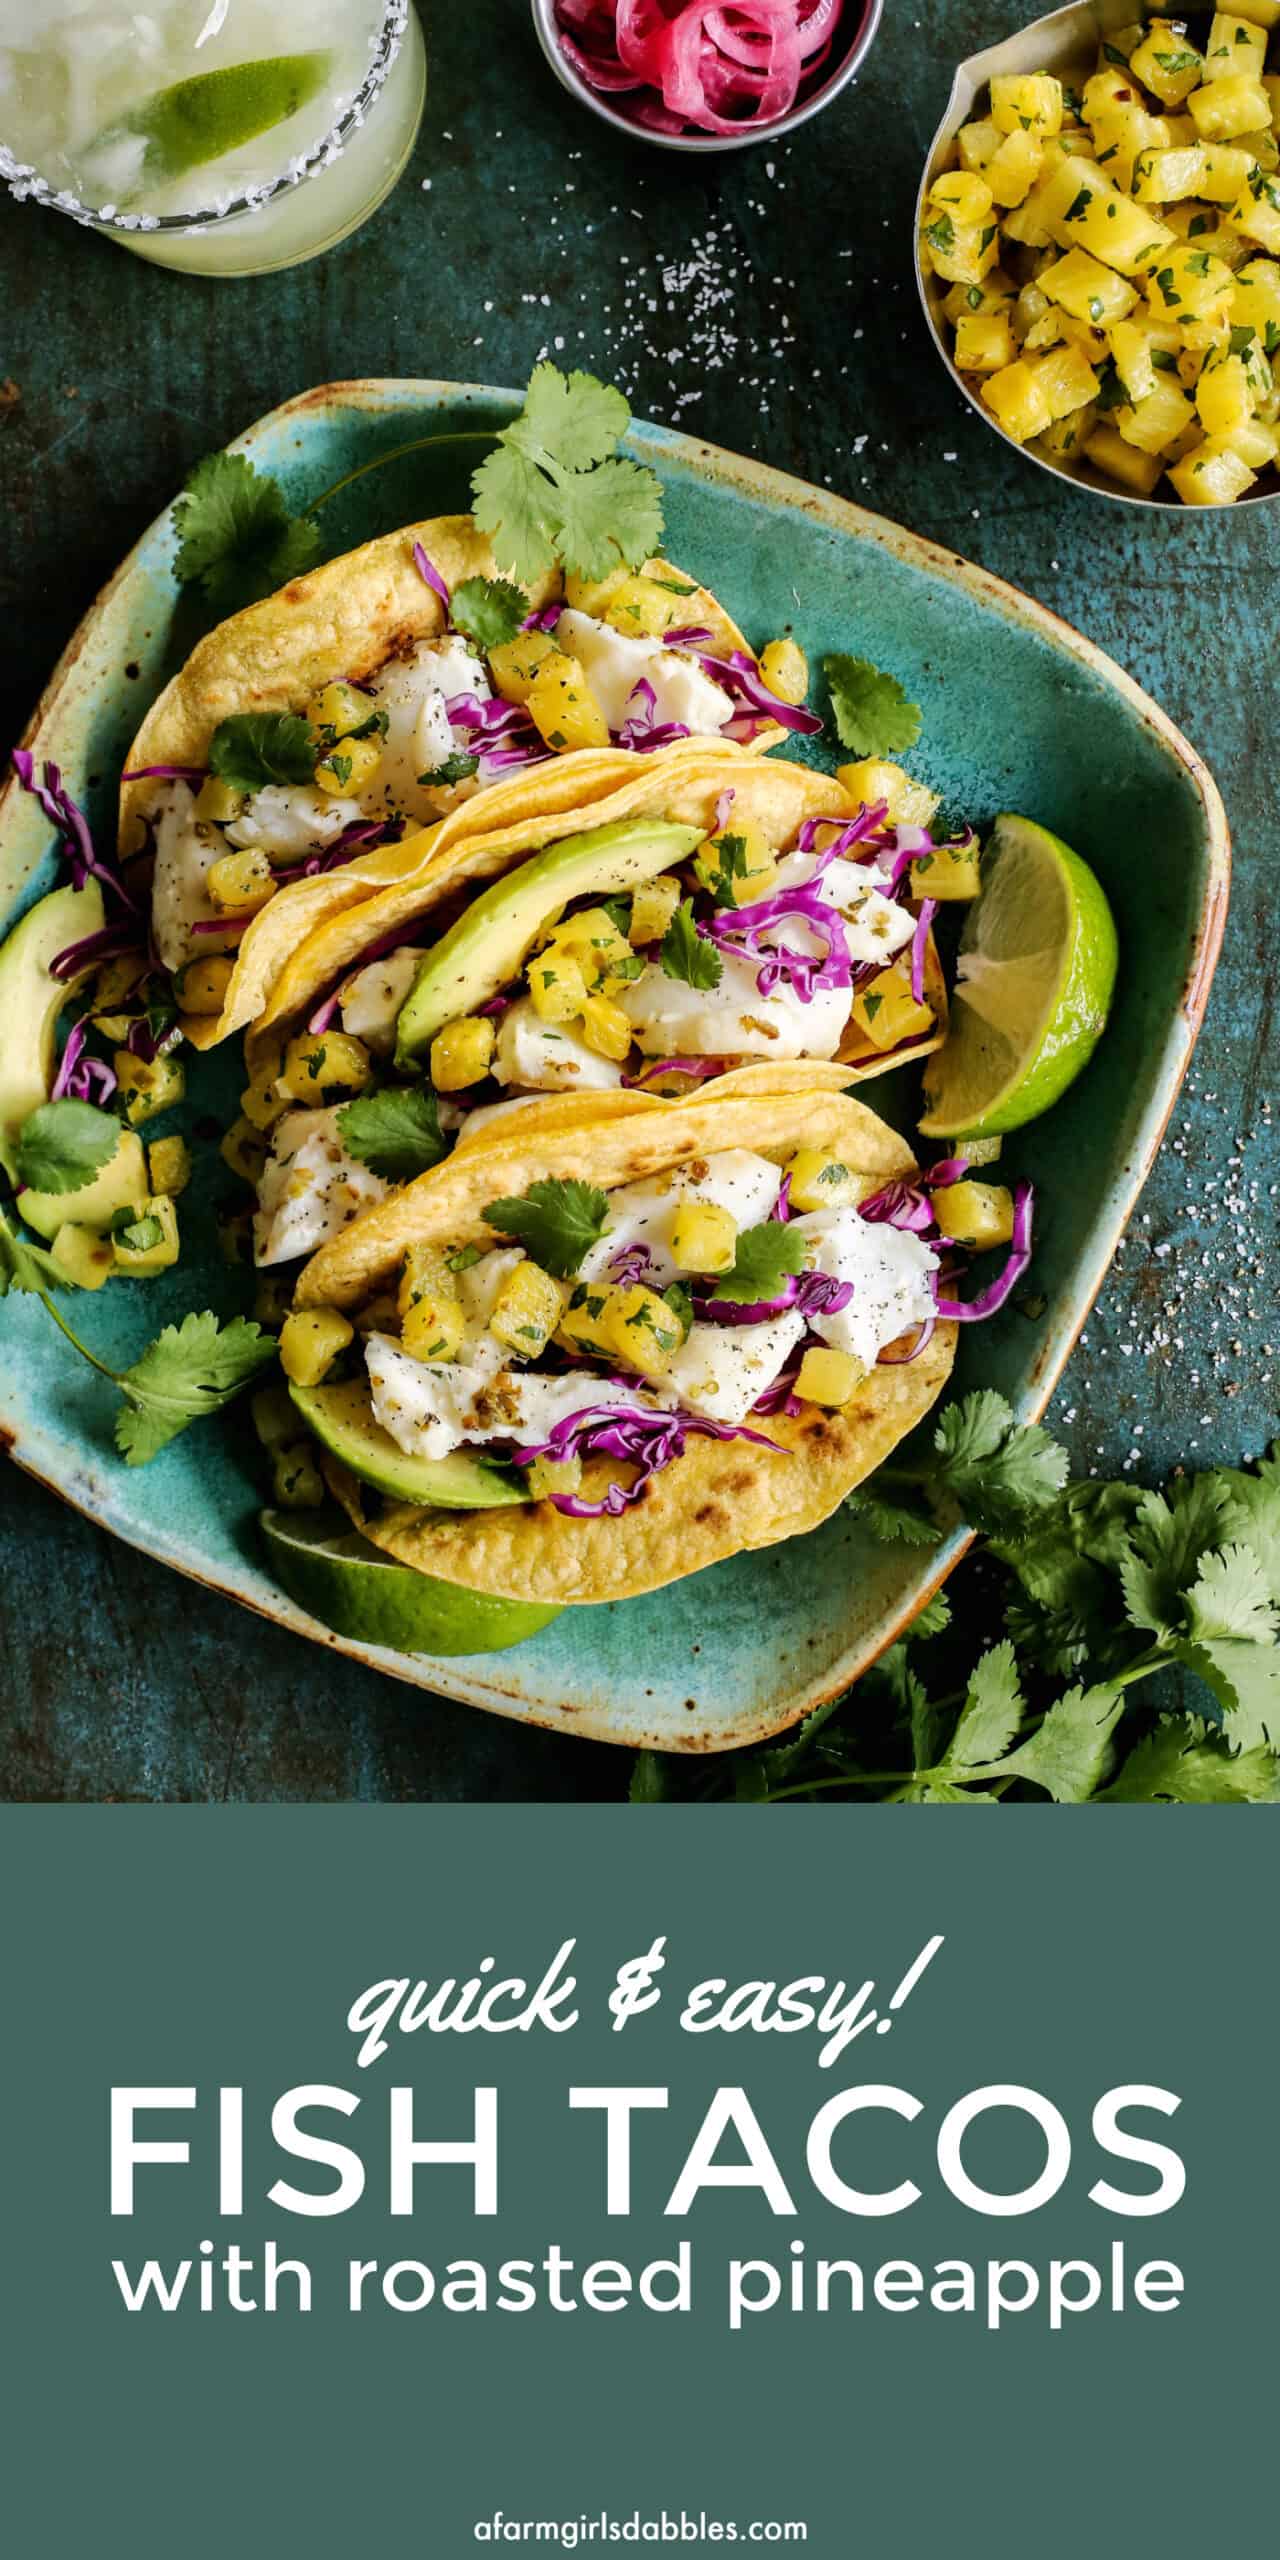 pinterest image of fish tacos with roasted pineapple